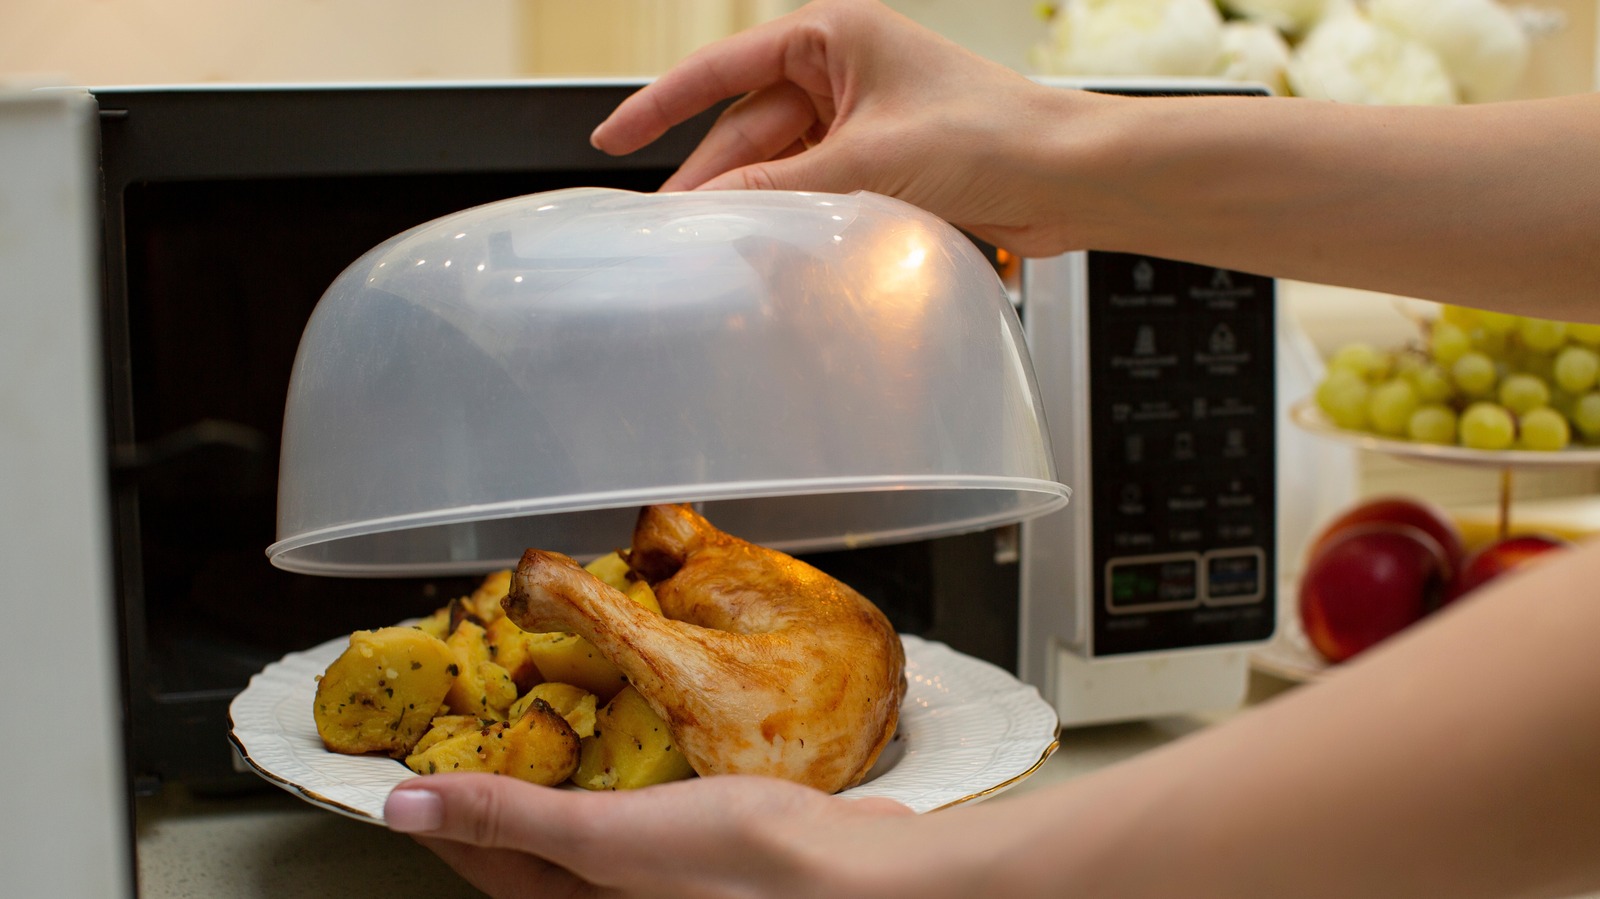 How to Safely Reheat / Cook in Microwaves